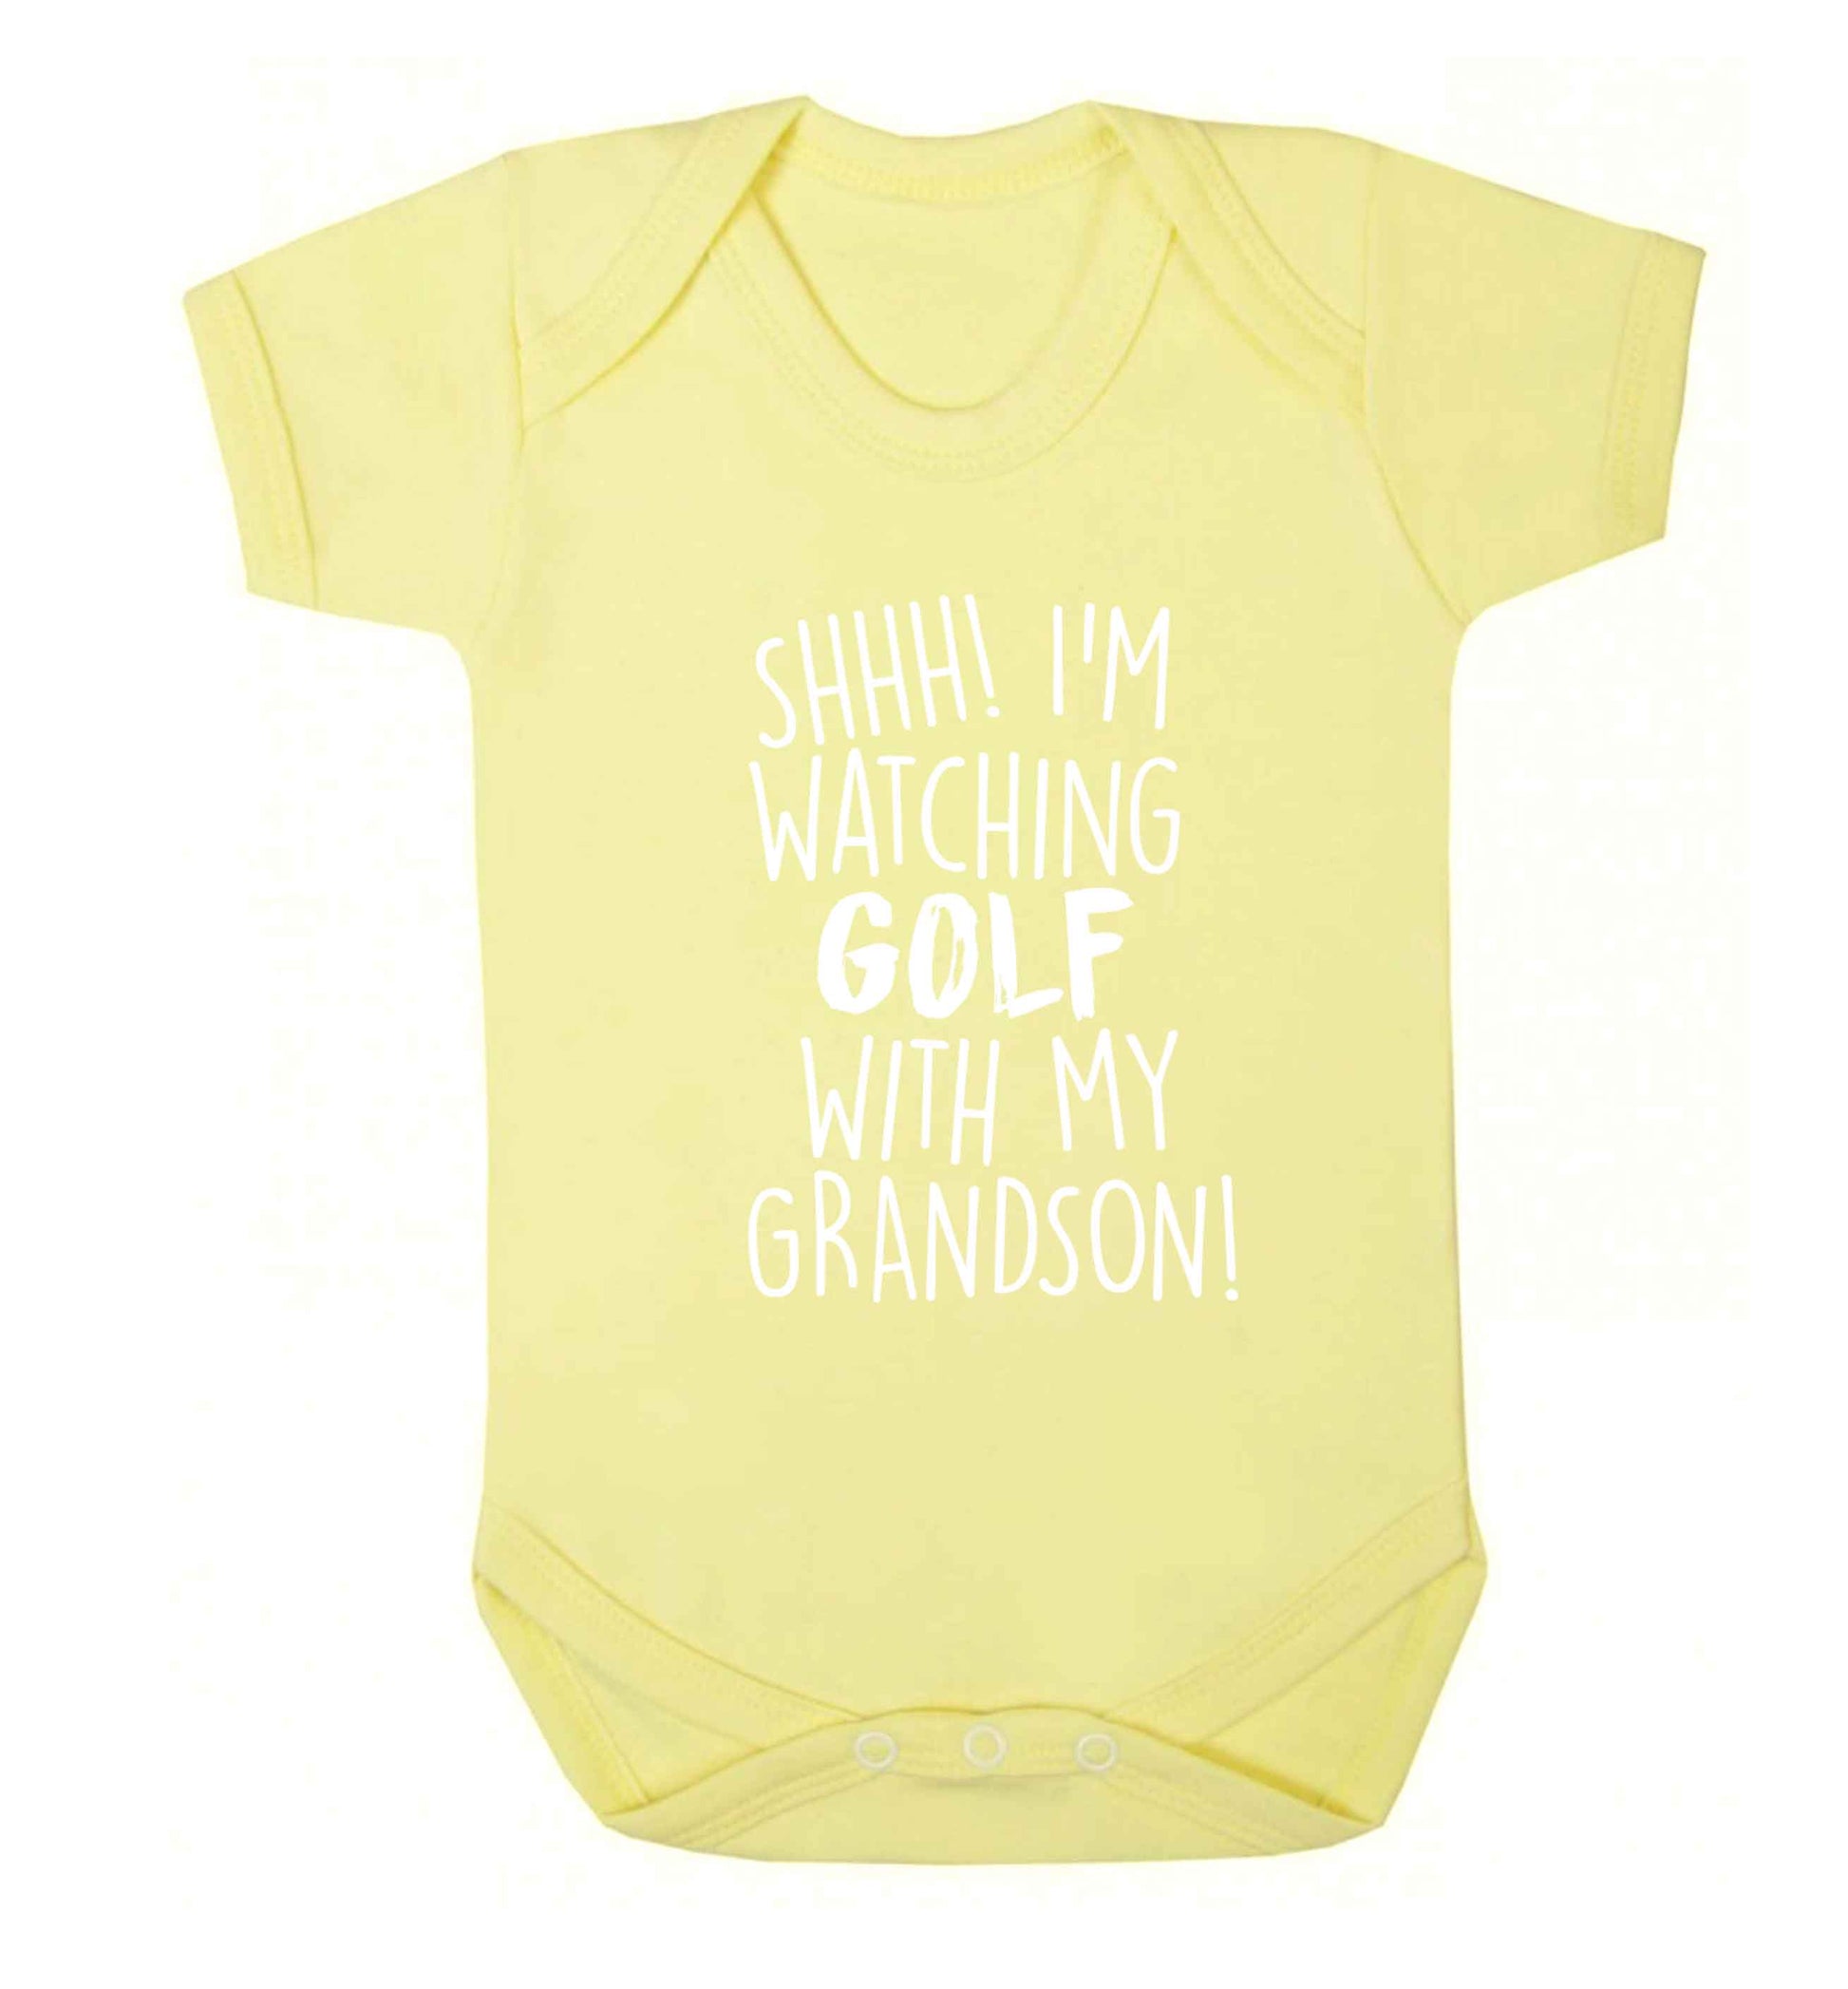 Shh I'm watching golf with my grandsonBaby Vest pale yellow 18-24 months